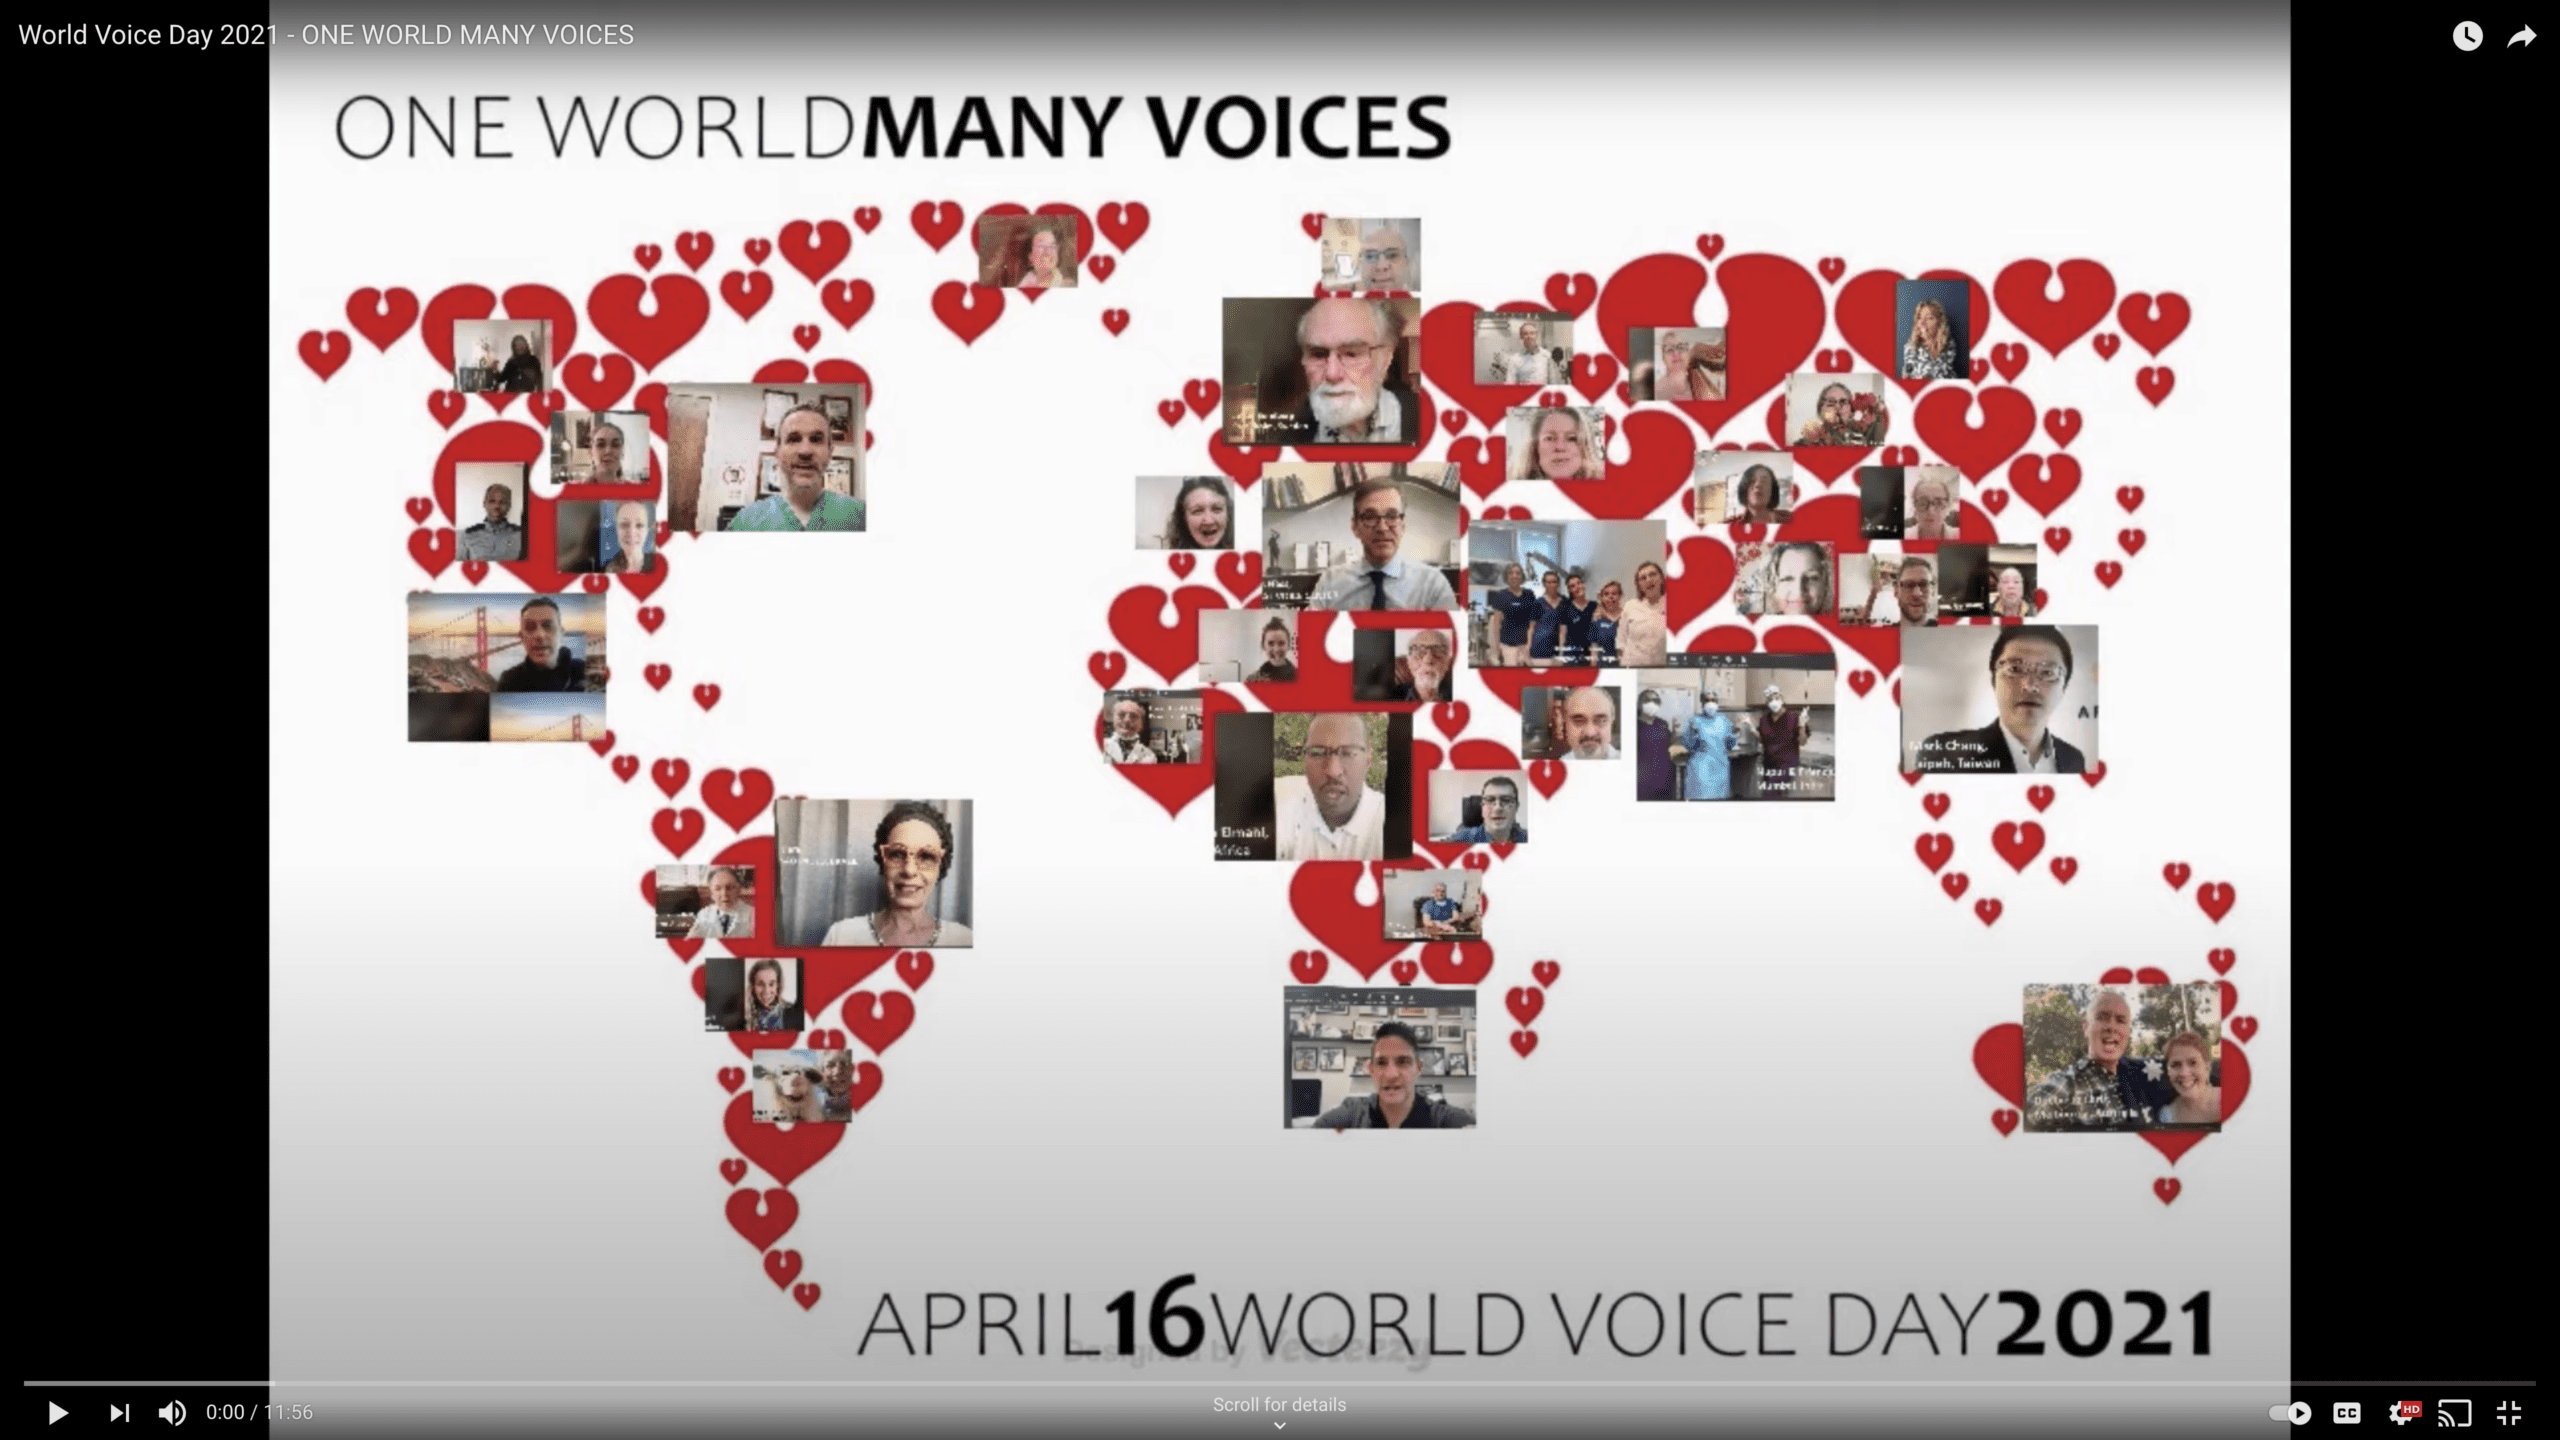 World Voice Day 2021 - ONE WORLD MANY VOICES